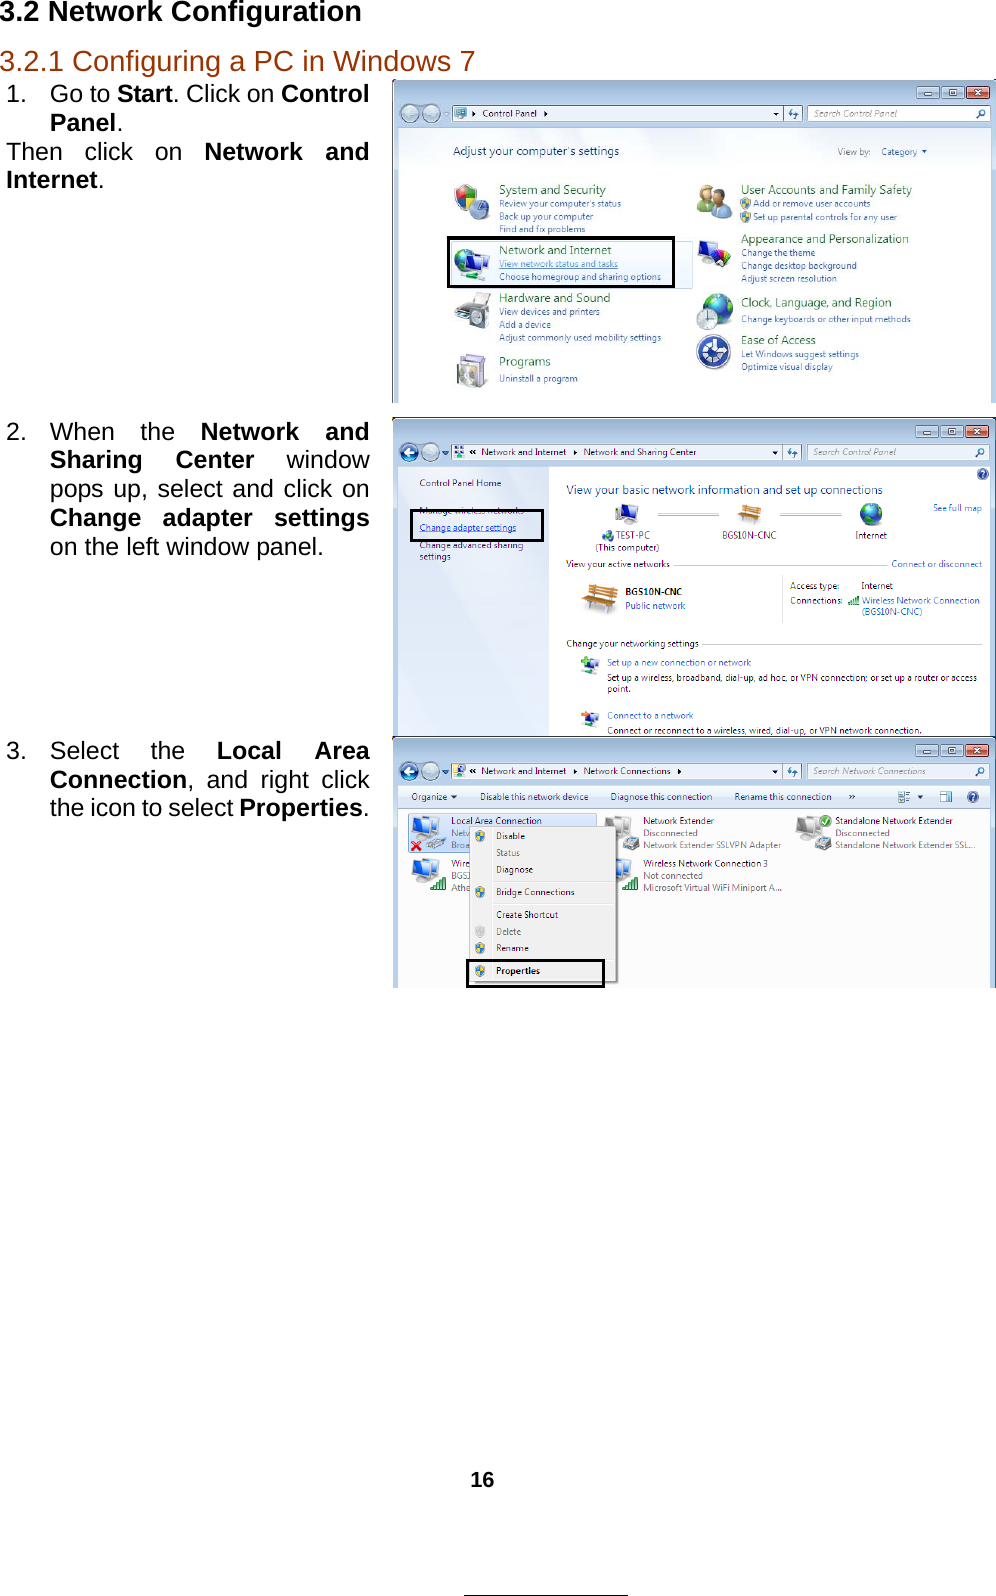 16 3.2 Network Configuration 3.2.1 Configuring a PC in Windows 7 1. Go to Start. Click on Control Panel. Then click on Network and Internet. 2. When the Network and Sharing Center window pops up, select and click on Change adapter settings on the left window panel. 3. Select  the  Local Area Connection, and right click the icon to select Properties. 